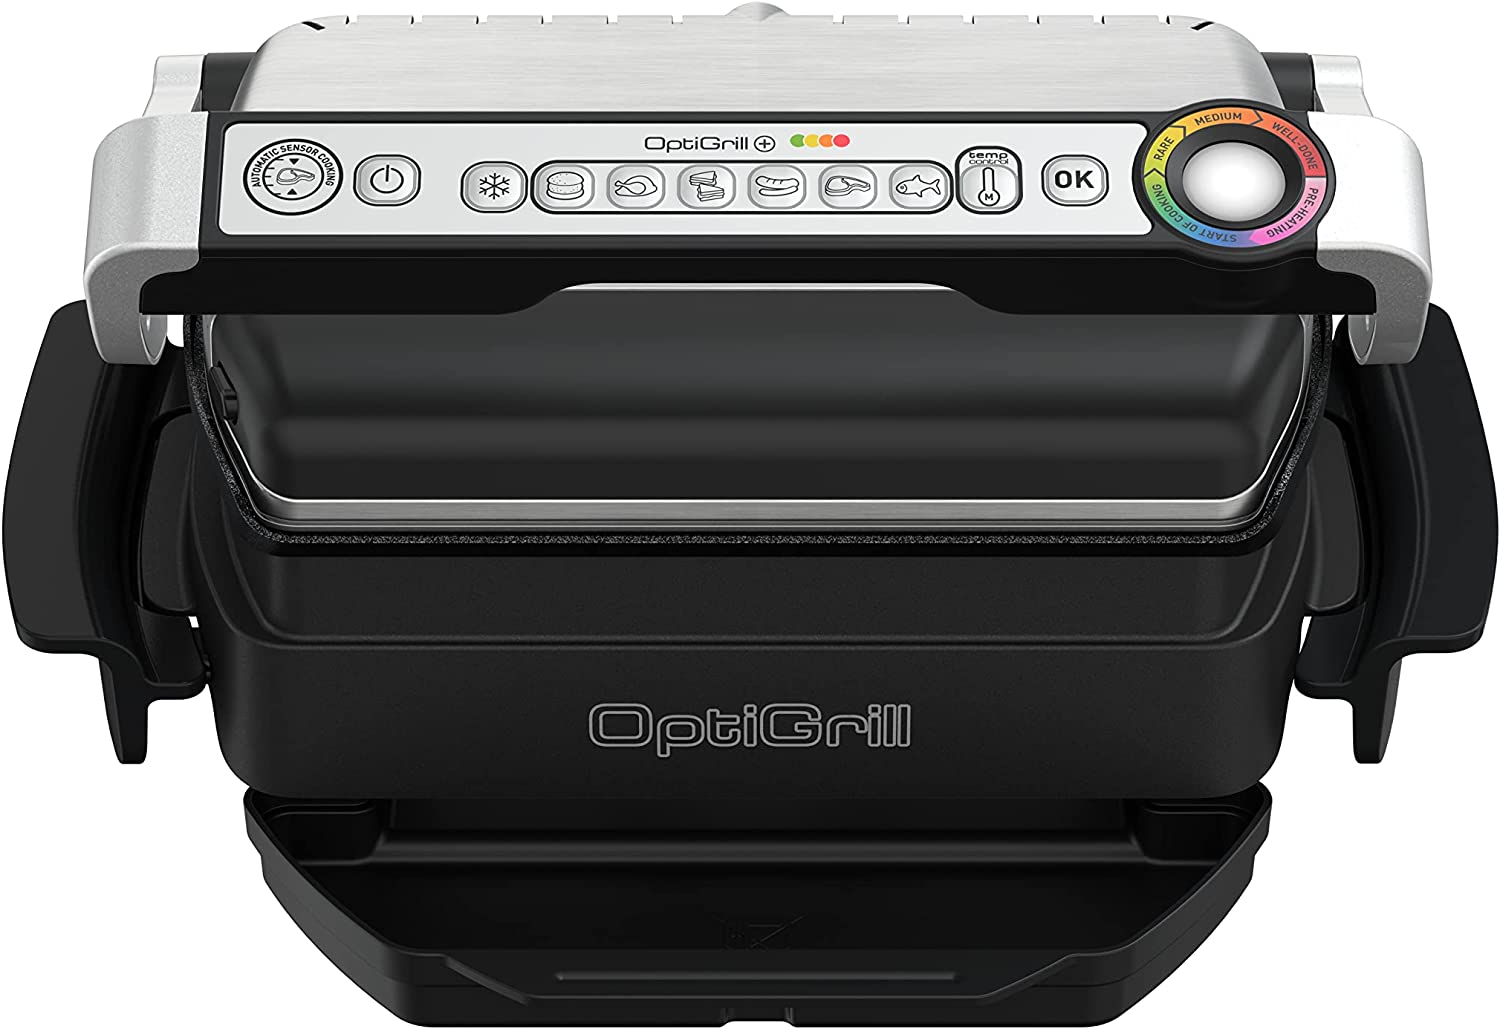 Tefal GC714D OptiGrill+ Contact Grill with Baking Tray, 2000 Watt, 6 Preset Programmes, Defrost Function, 4 Adjustable Temperature Levels, Auto-Off Function, Removable Grill Plates, Silver